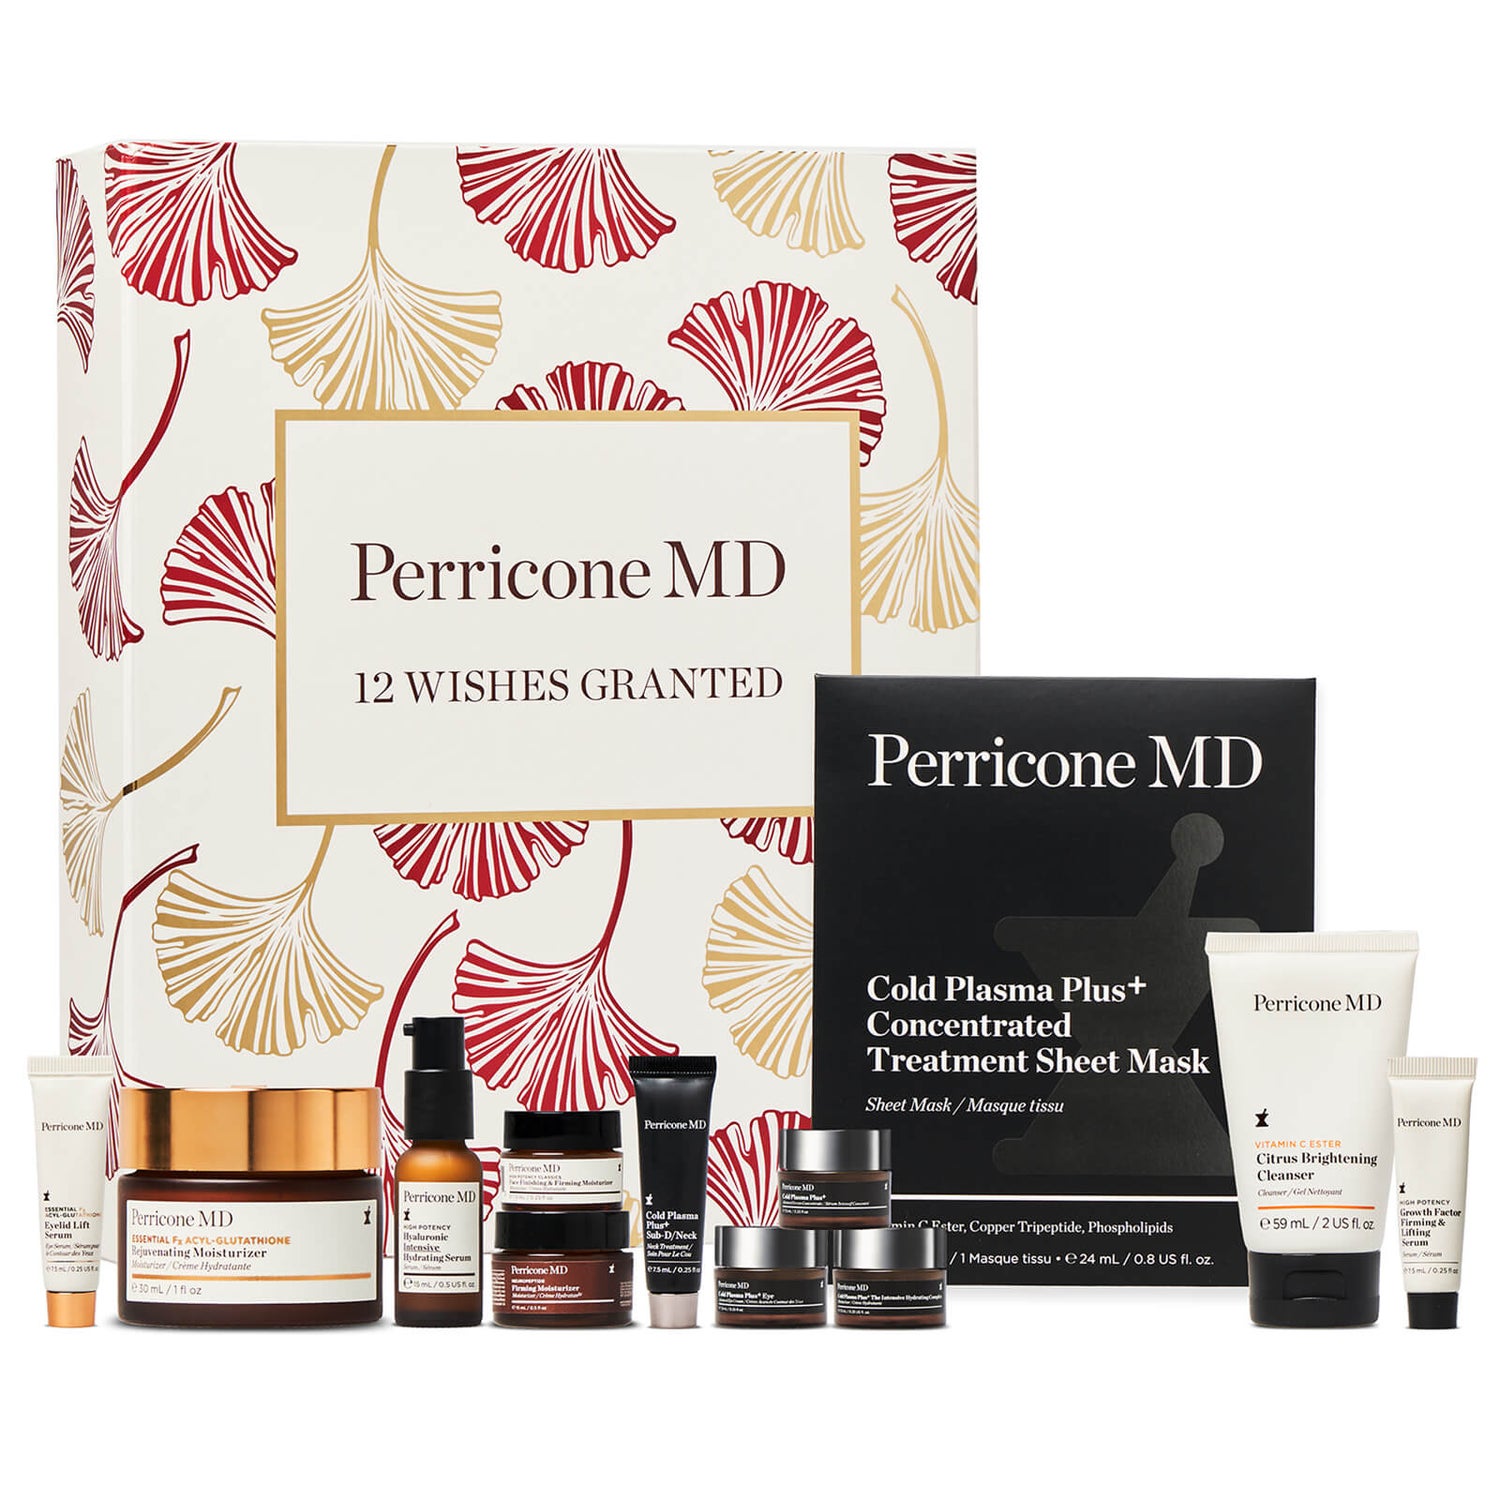 Perricone MD 12 Wishes Granted Advent Calendar (Worth £365.00)